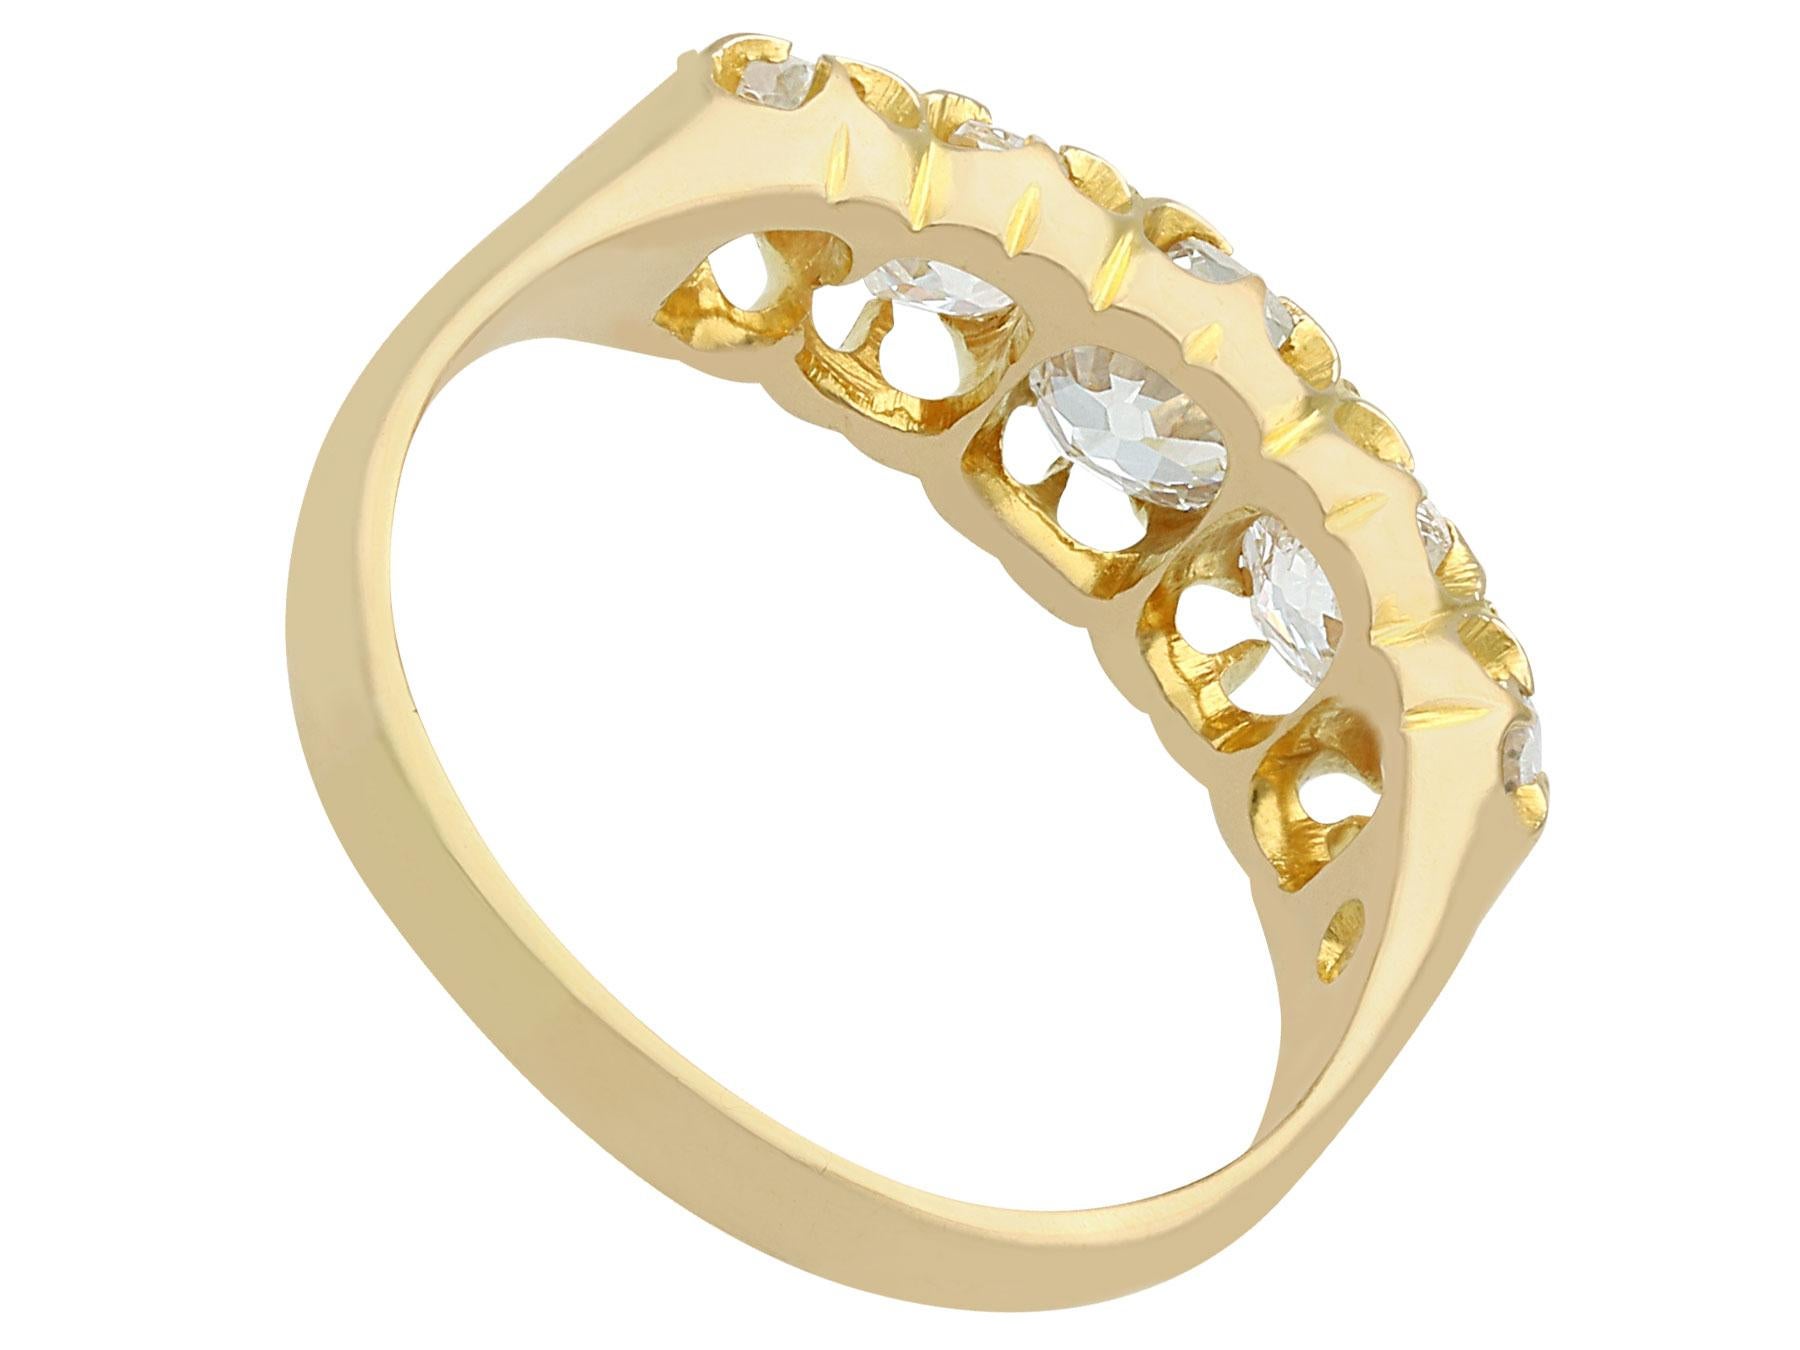 Women's or Men's 1858 Antique 1.51 Carat Diamond and Yellow Gold Five-Stone Ring